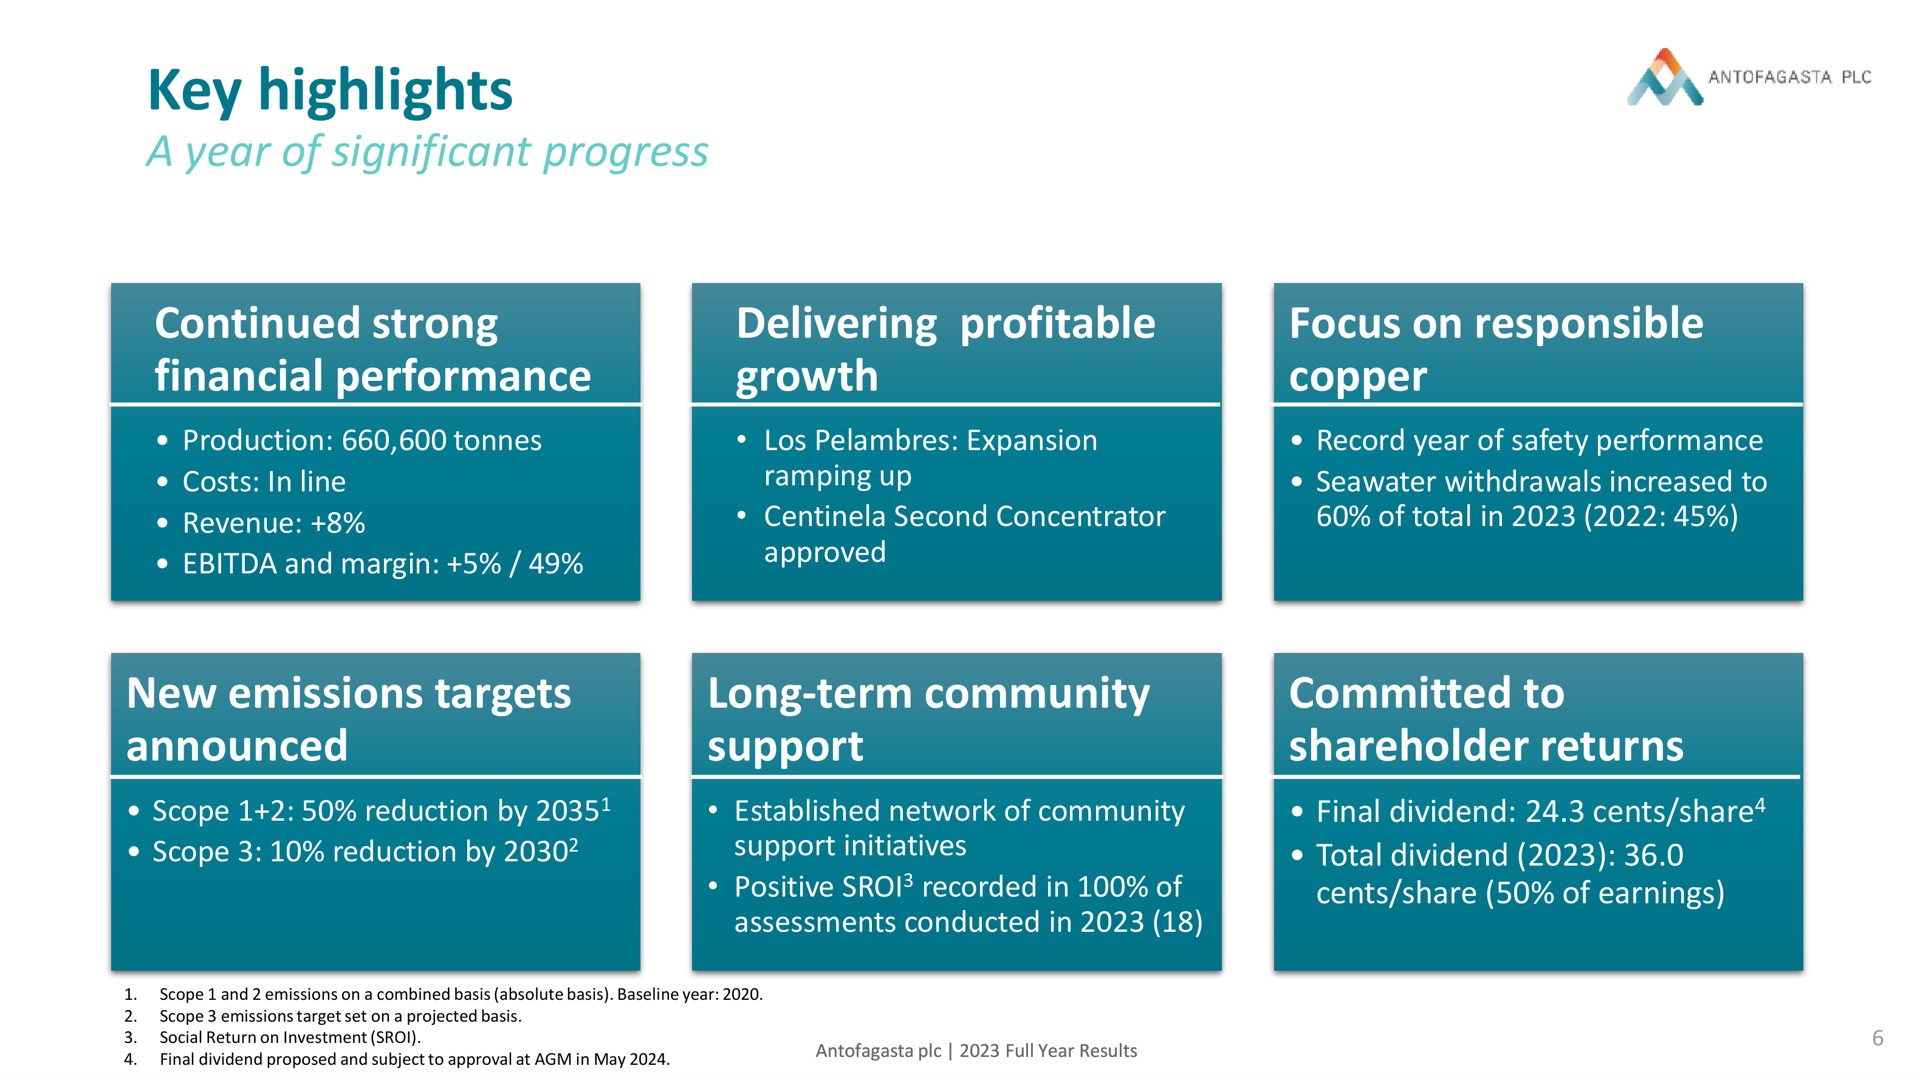 key highlights a year of significant progress an continued strong financial performance delivering profitable growth focus on responsible copper new emissions targets announced long term community ley as | Antofagasta